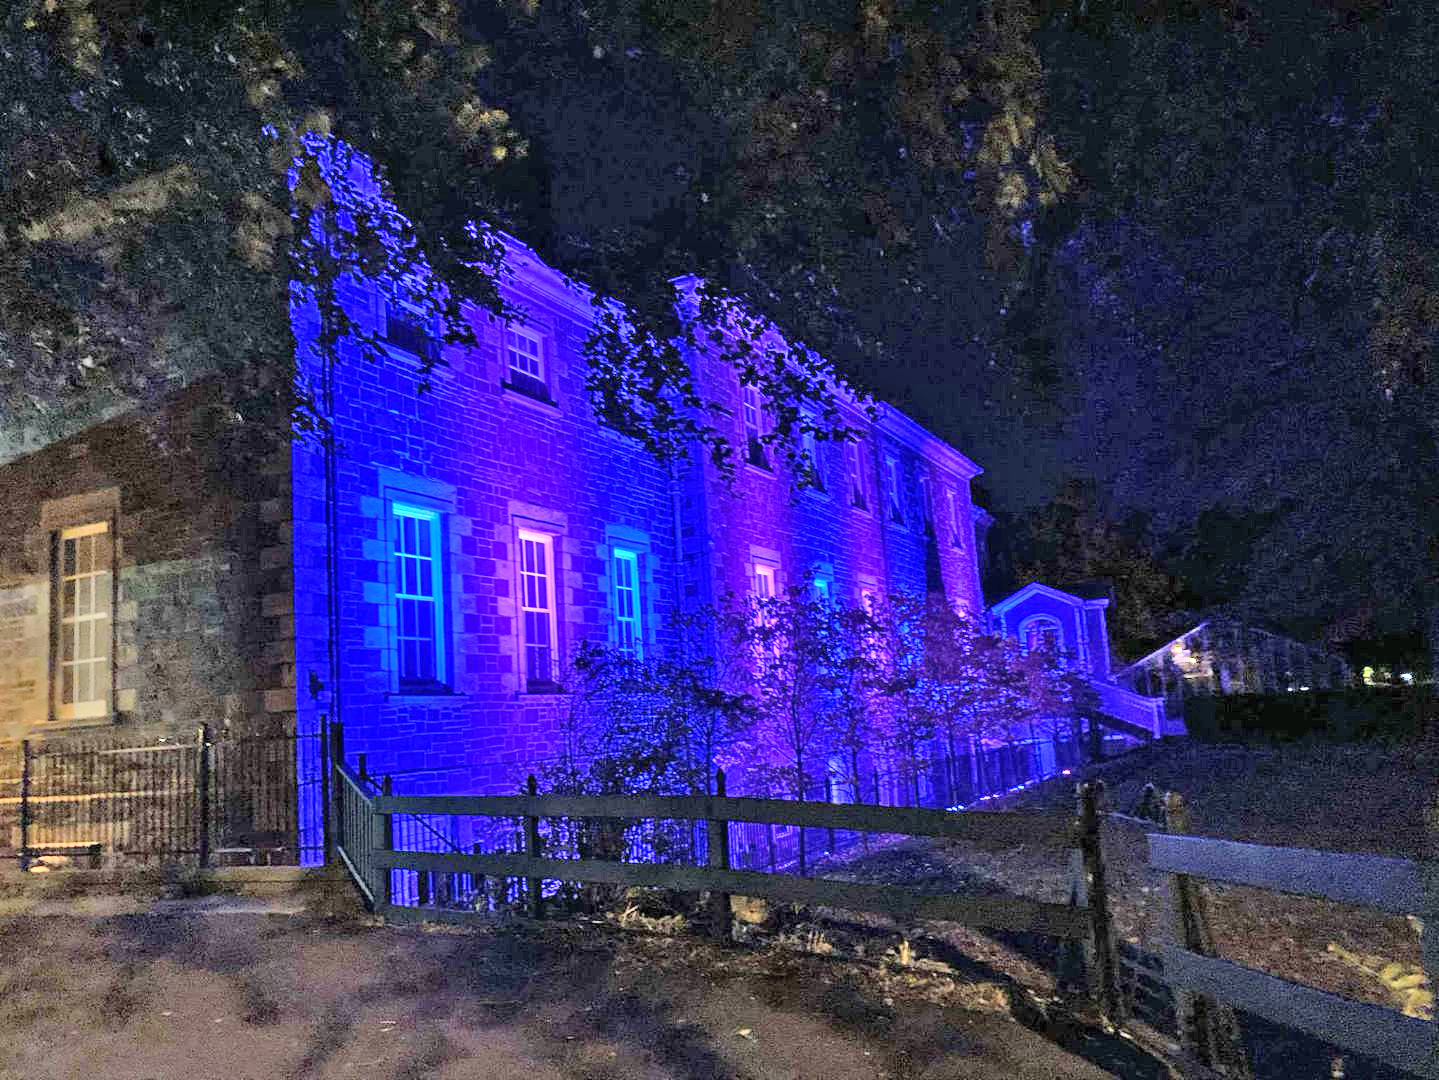 A photo of Government House in St. John's. The exterior wall and windows near to the camera are glowing purple and blue.